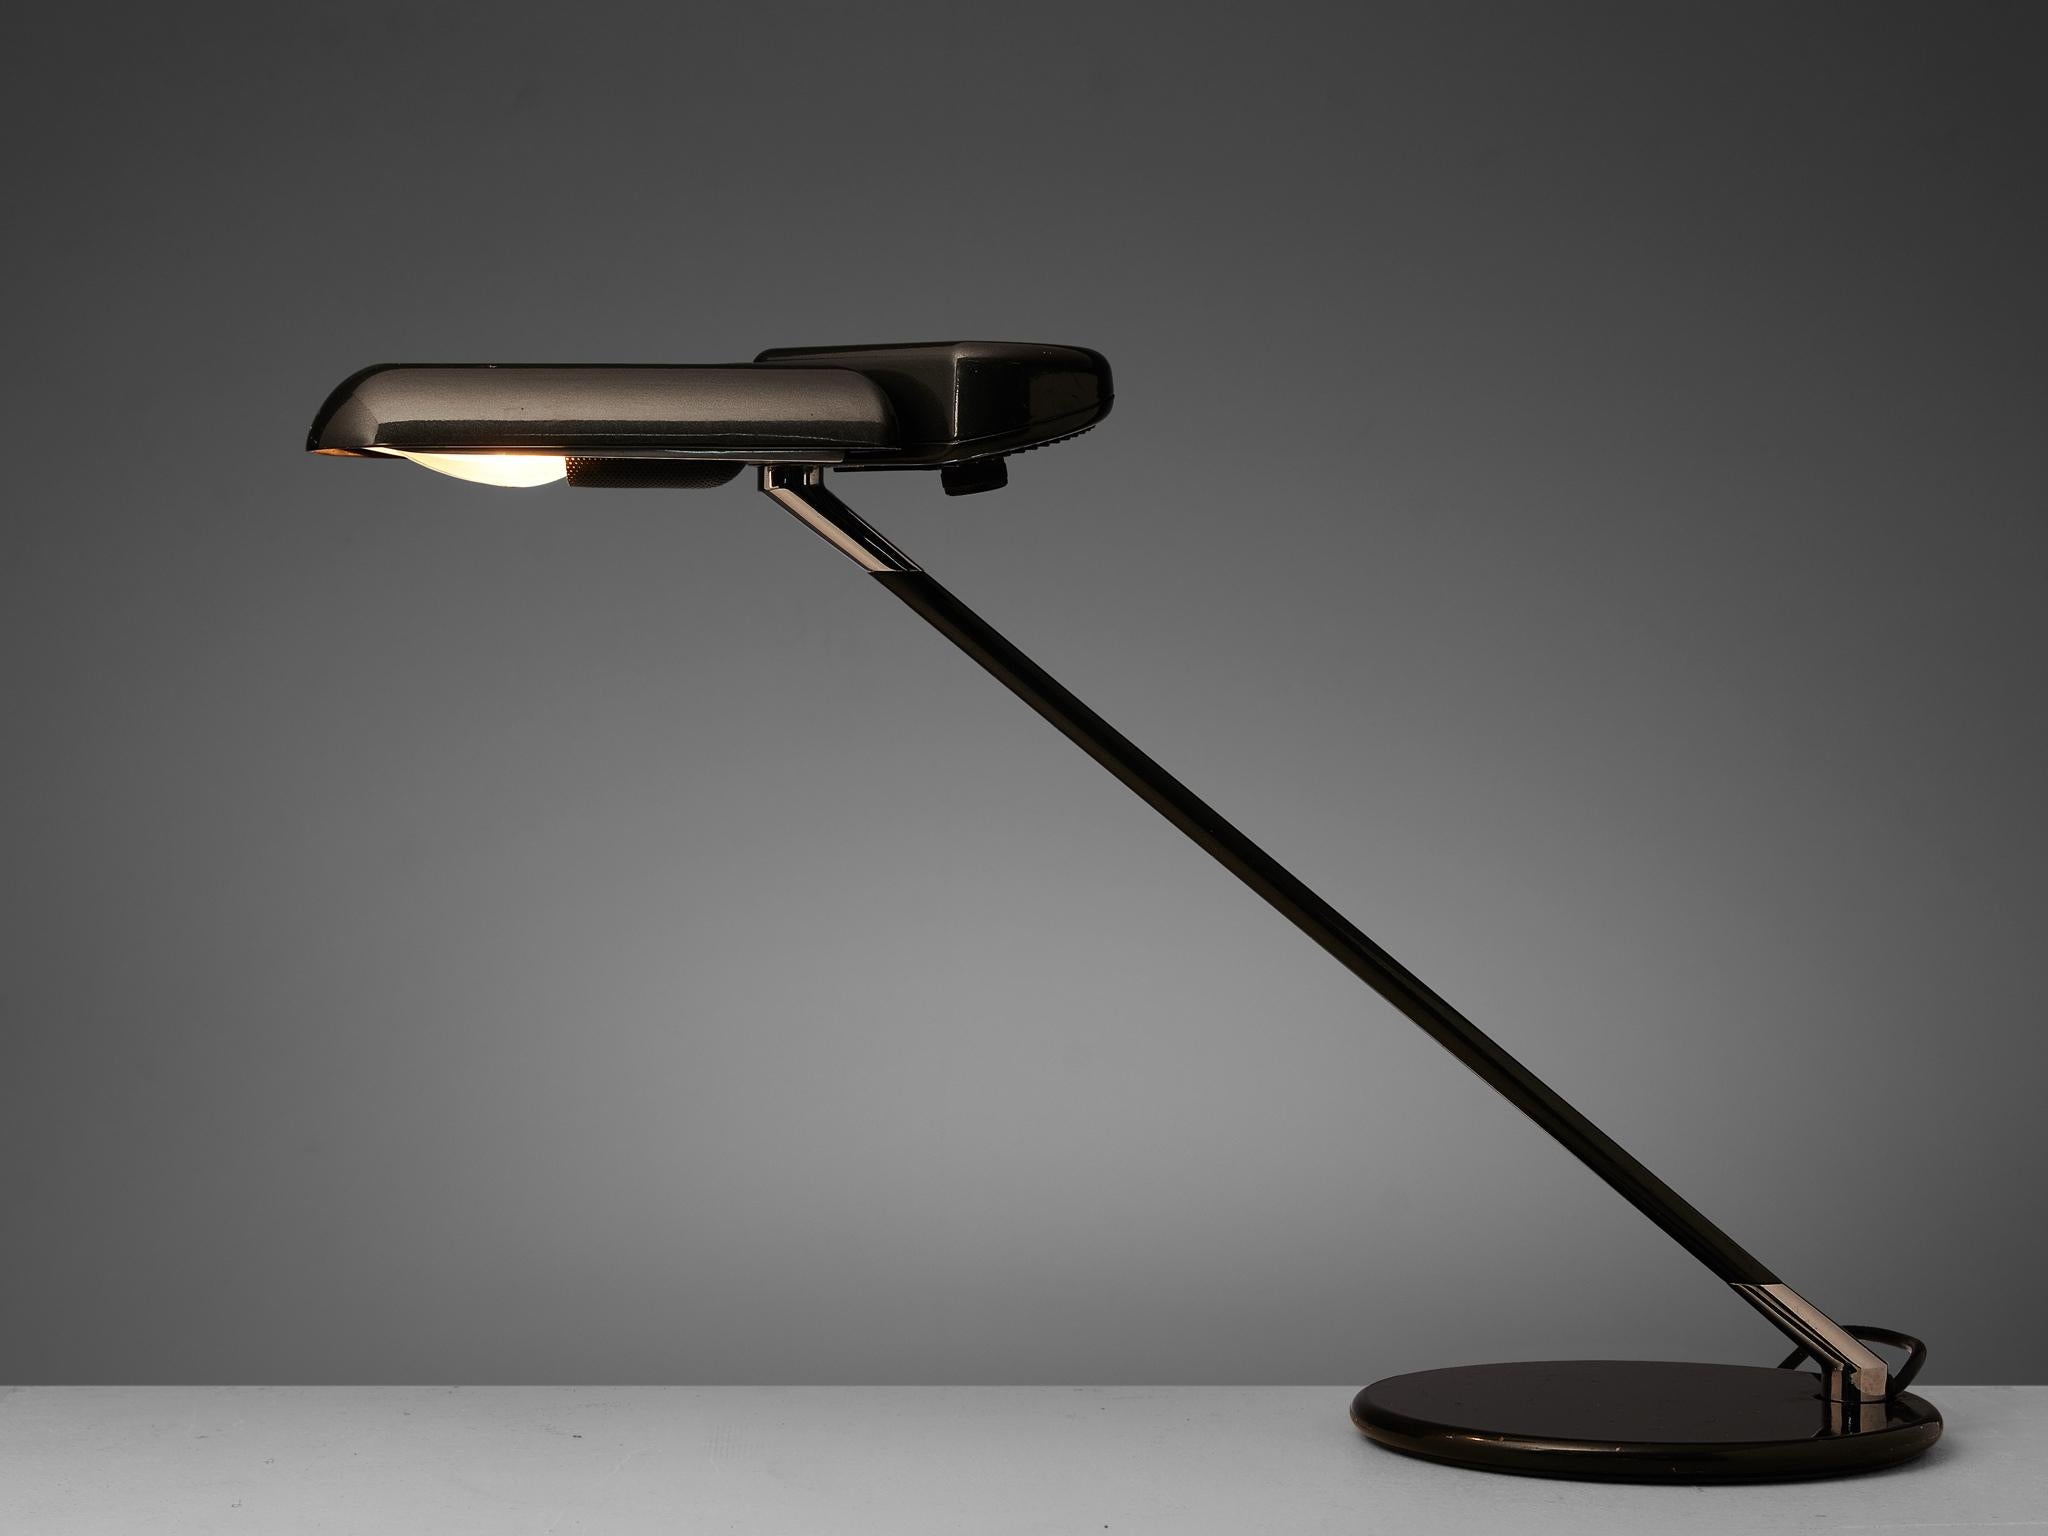 Bruno Gecchelin for Arteluce, desk lamp ‘Ring’ A400, black metal, Italy, 1979

This ‘Ring’ desk lamp by Bruno Gecchelin for Arteluce was designed in 1979. It features an adjustable shade that can be turned in any direction that you prefer. The